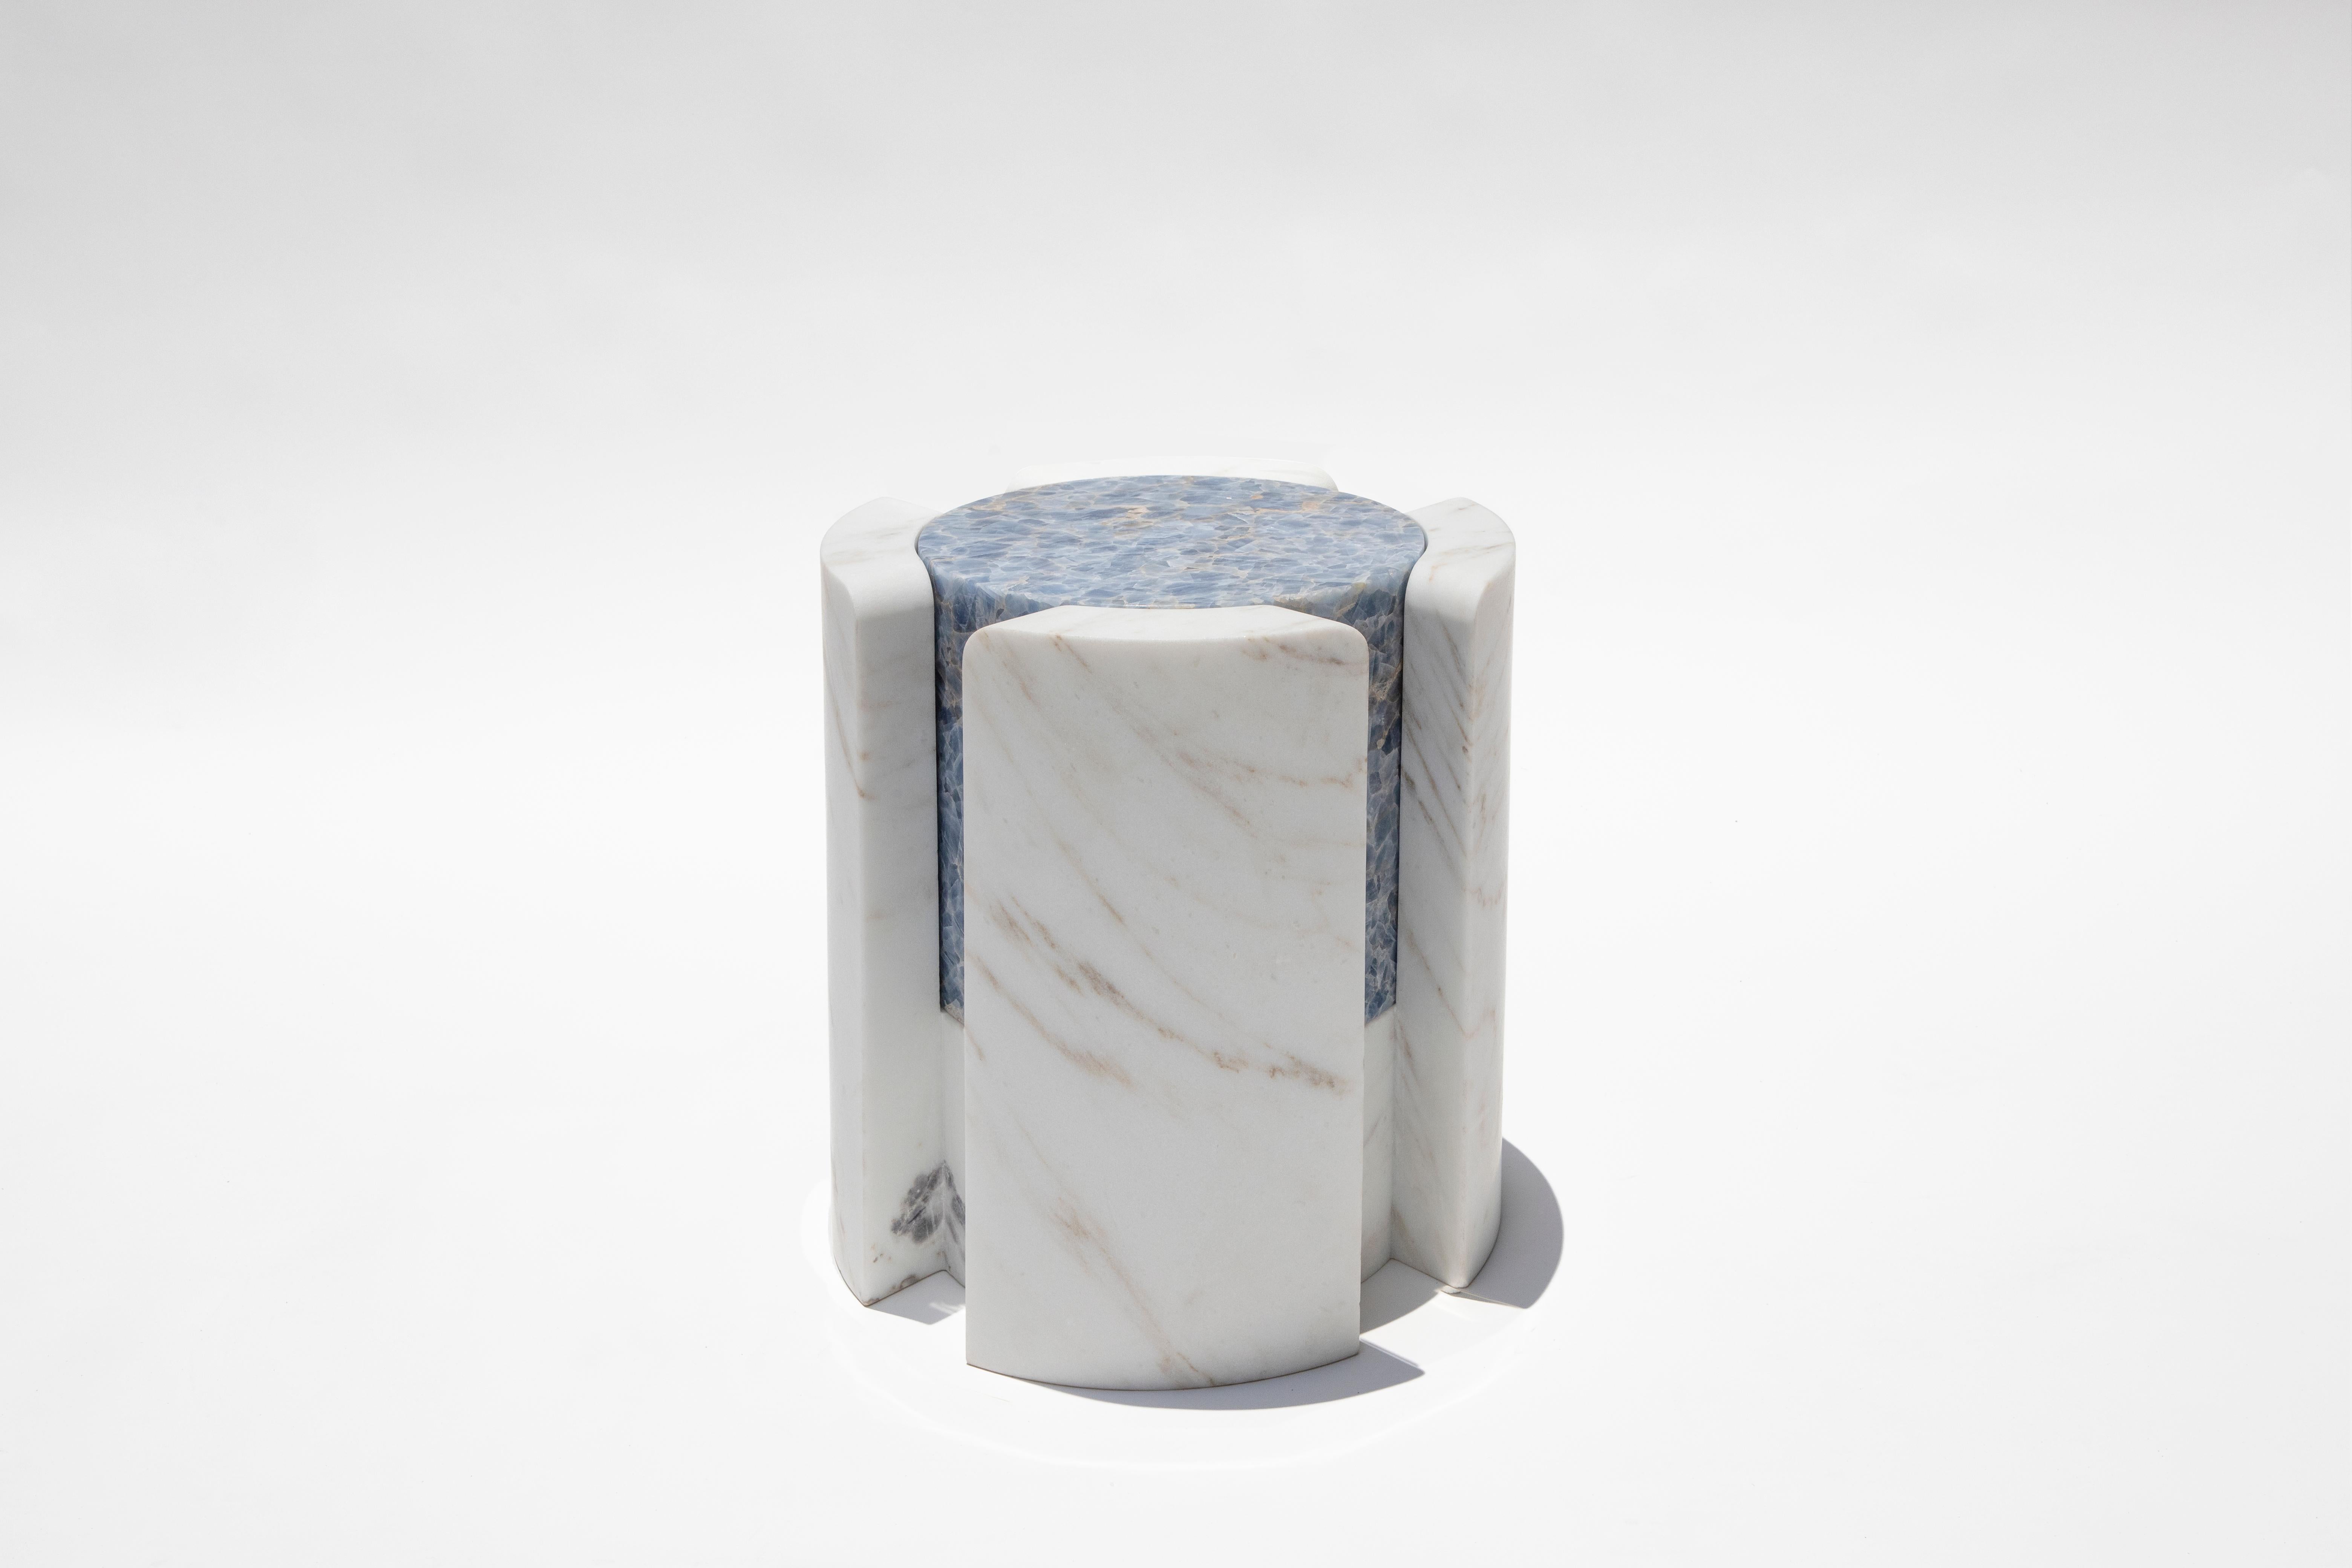 Organic Modern Volcanic Shade of Marble III Stool/Table by Sten Studio, REP by Tuleste Factory